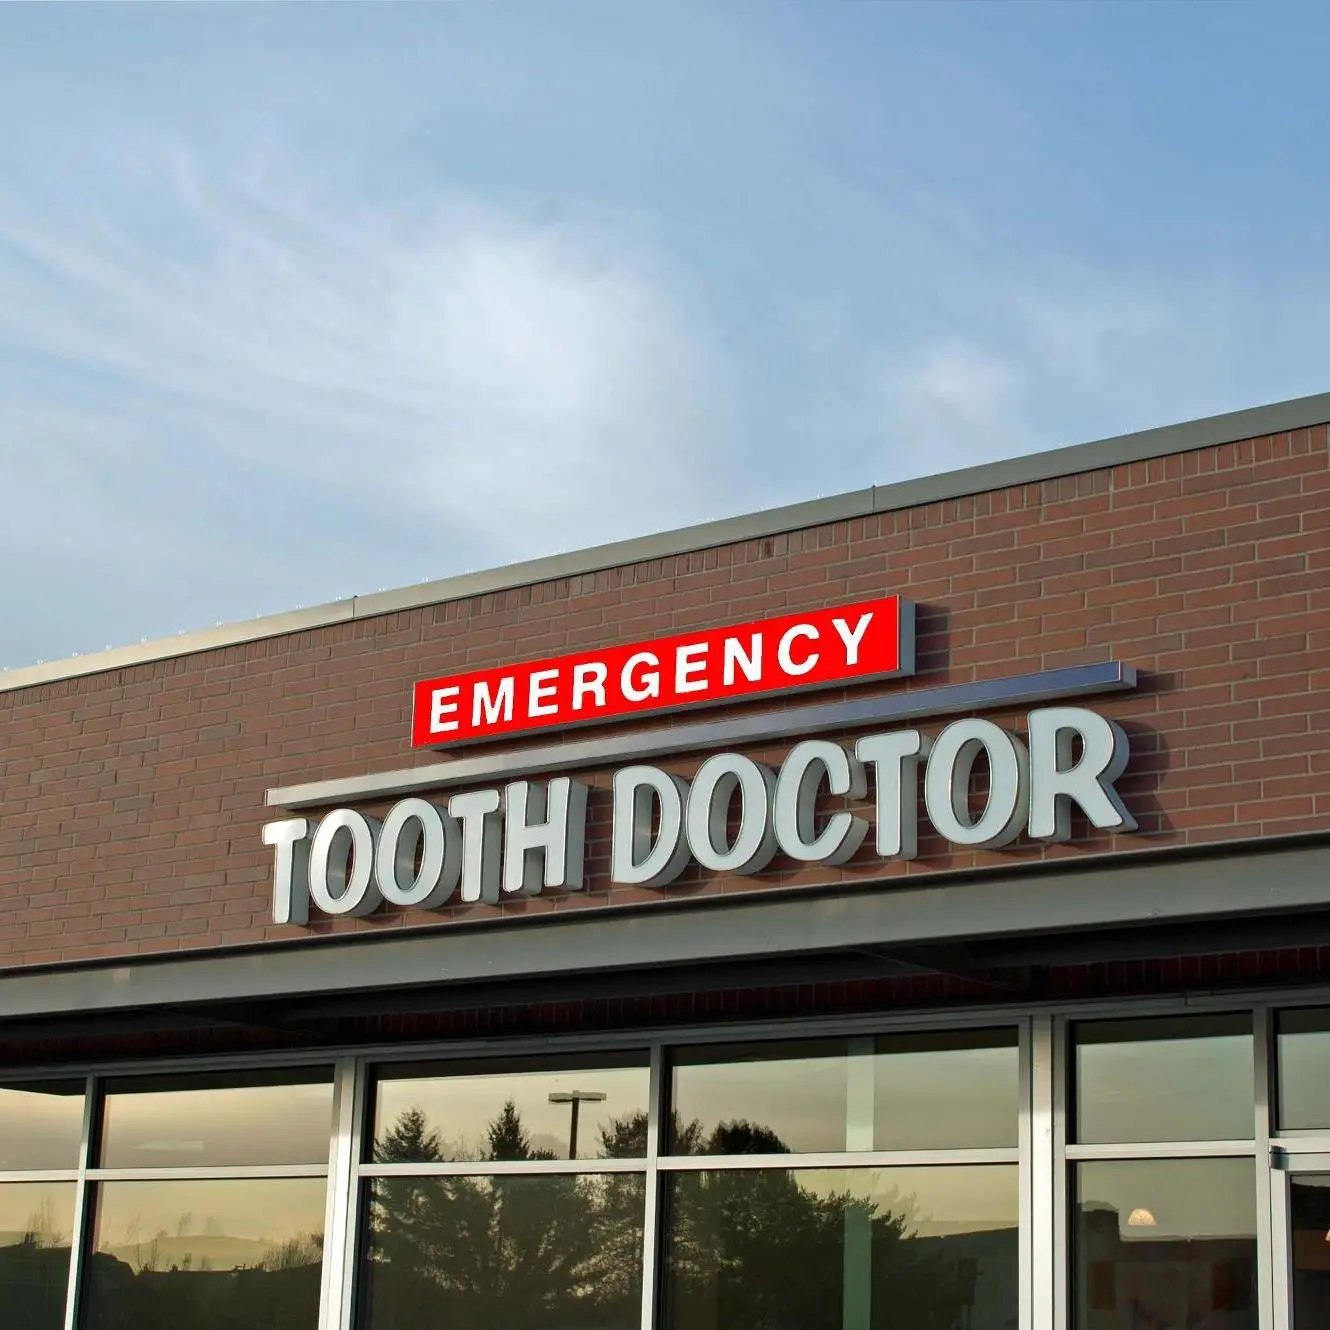 Eye Doctor Cayce Sc: Emergency Tooth Doctor Vancouver Wa